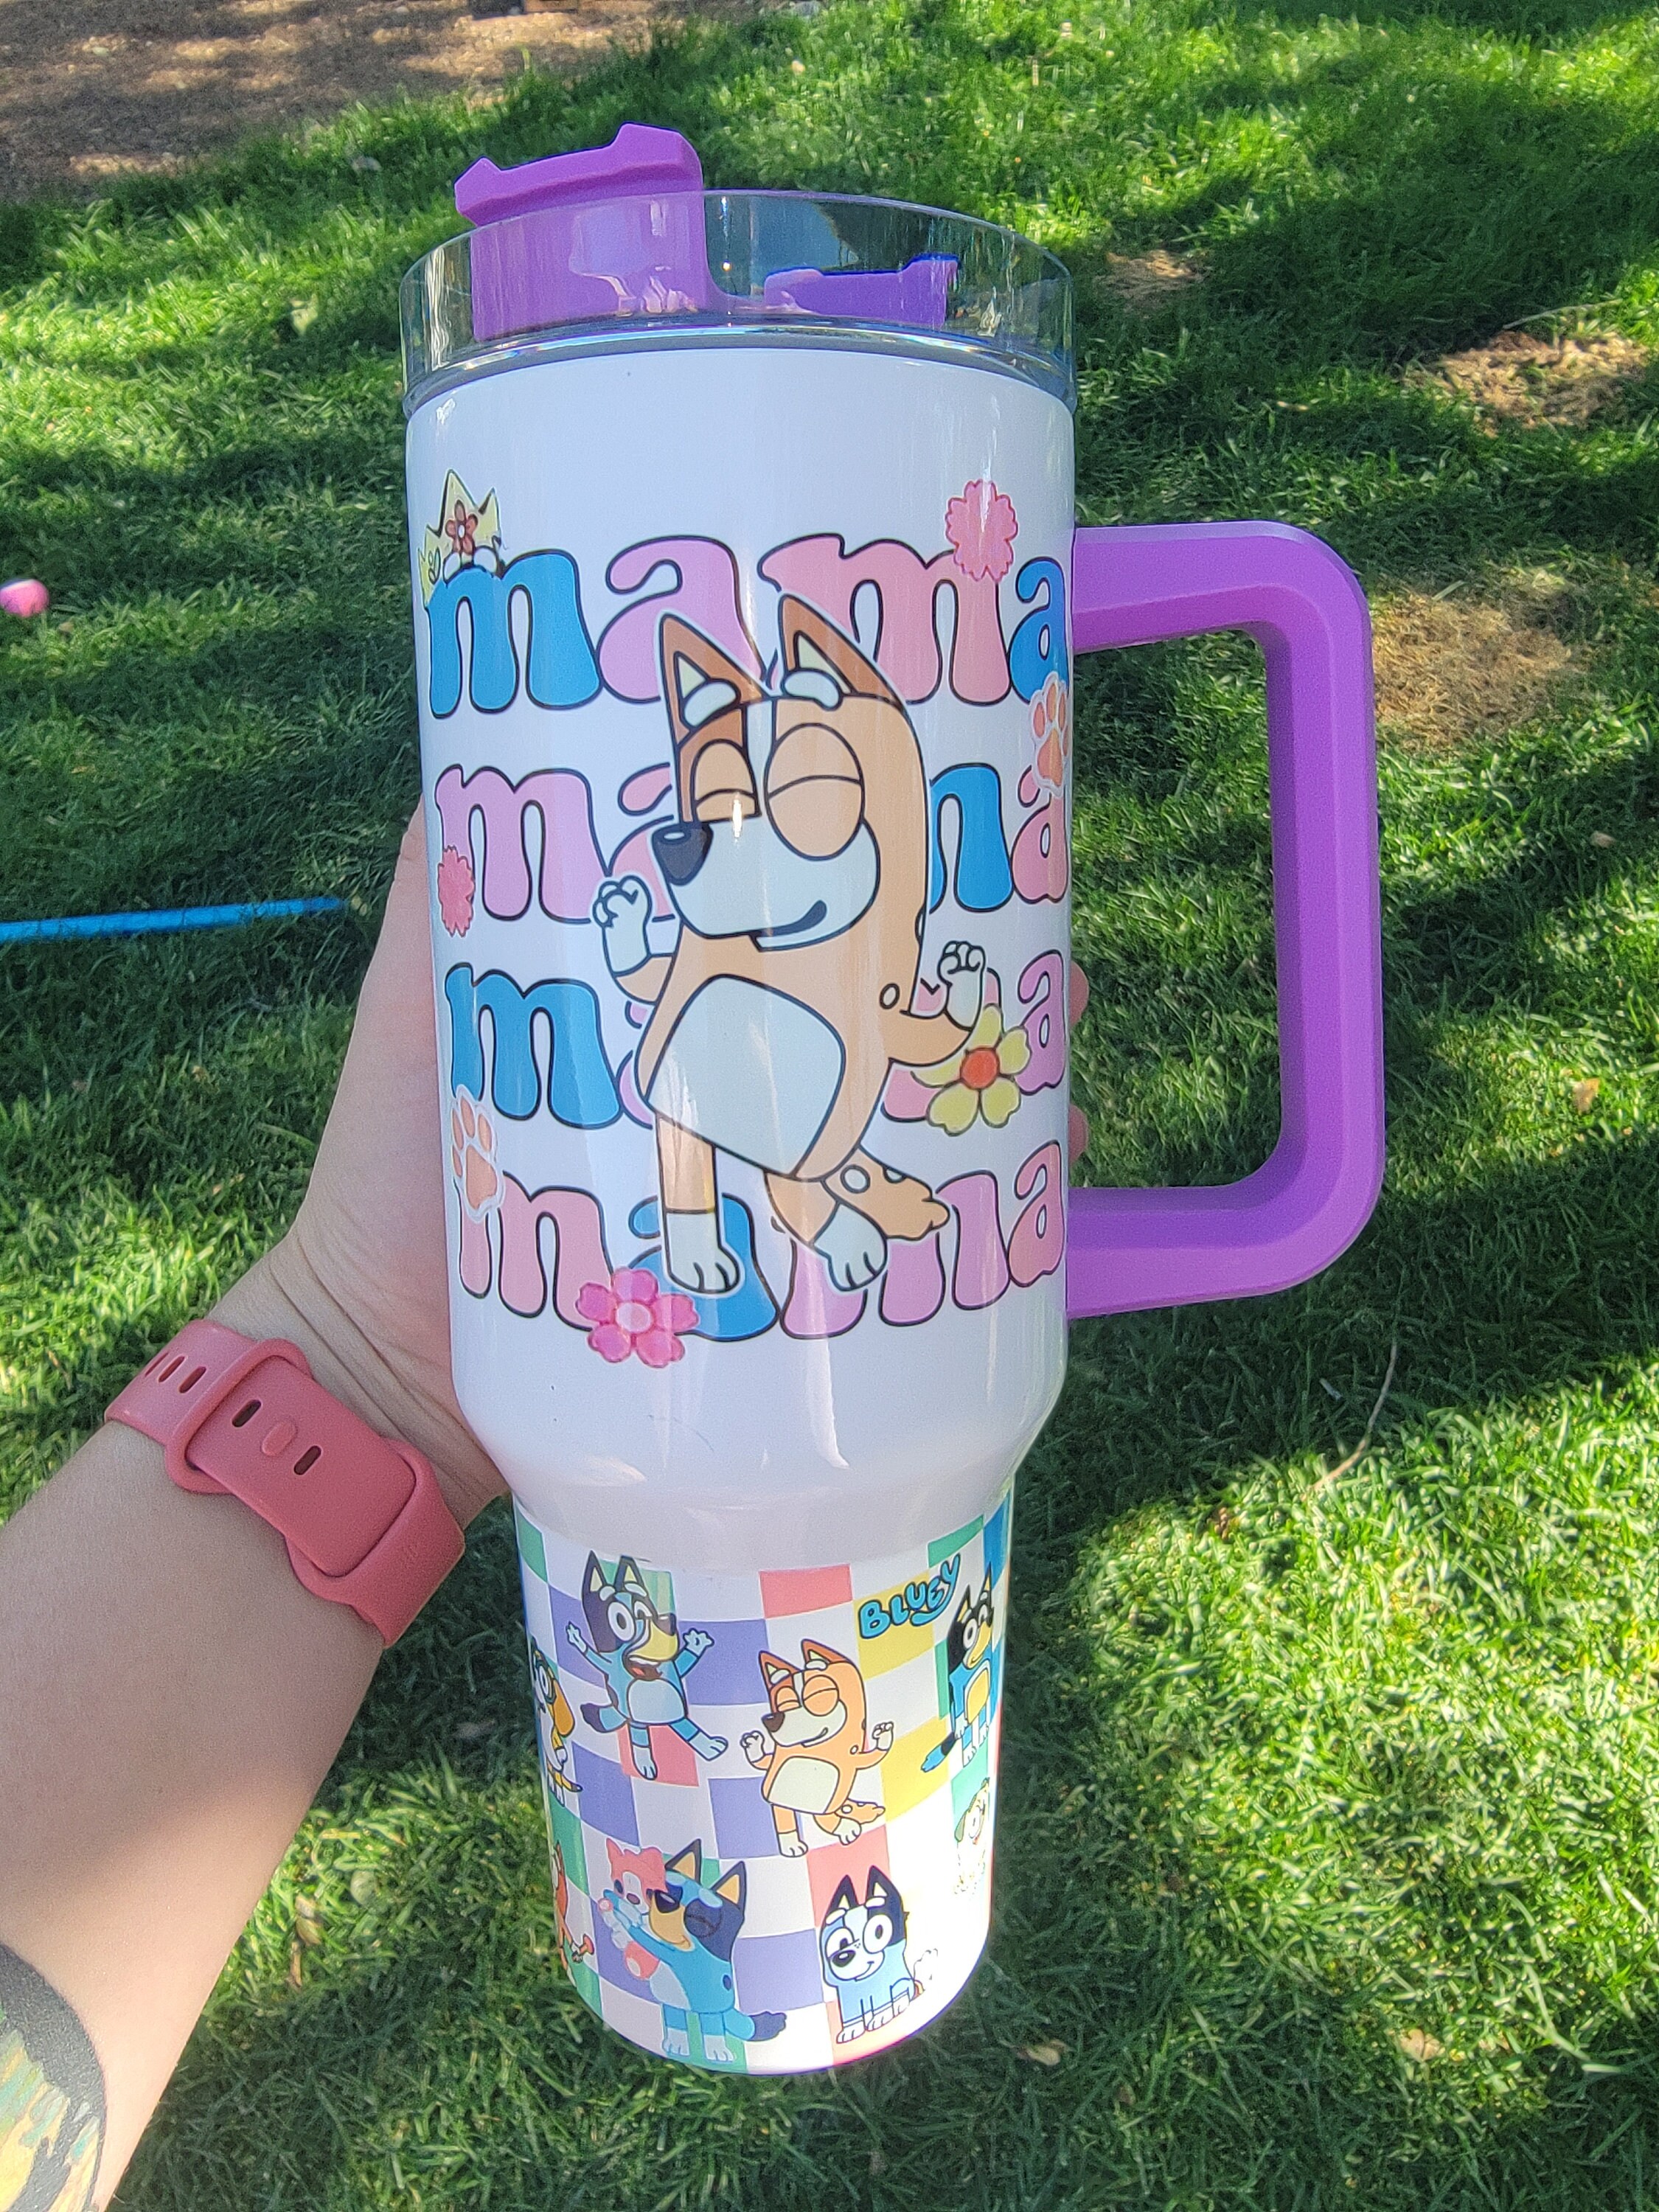 check out the new cup! 😍 #bluey #momchecklist #newcup